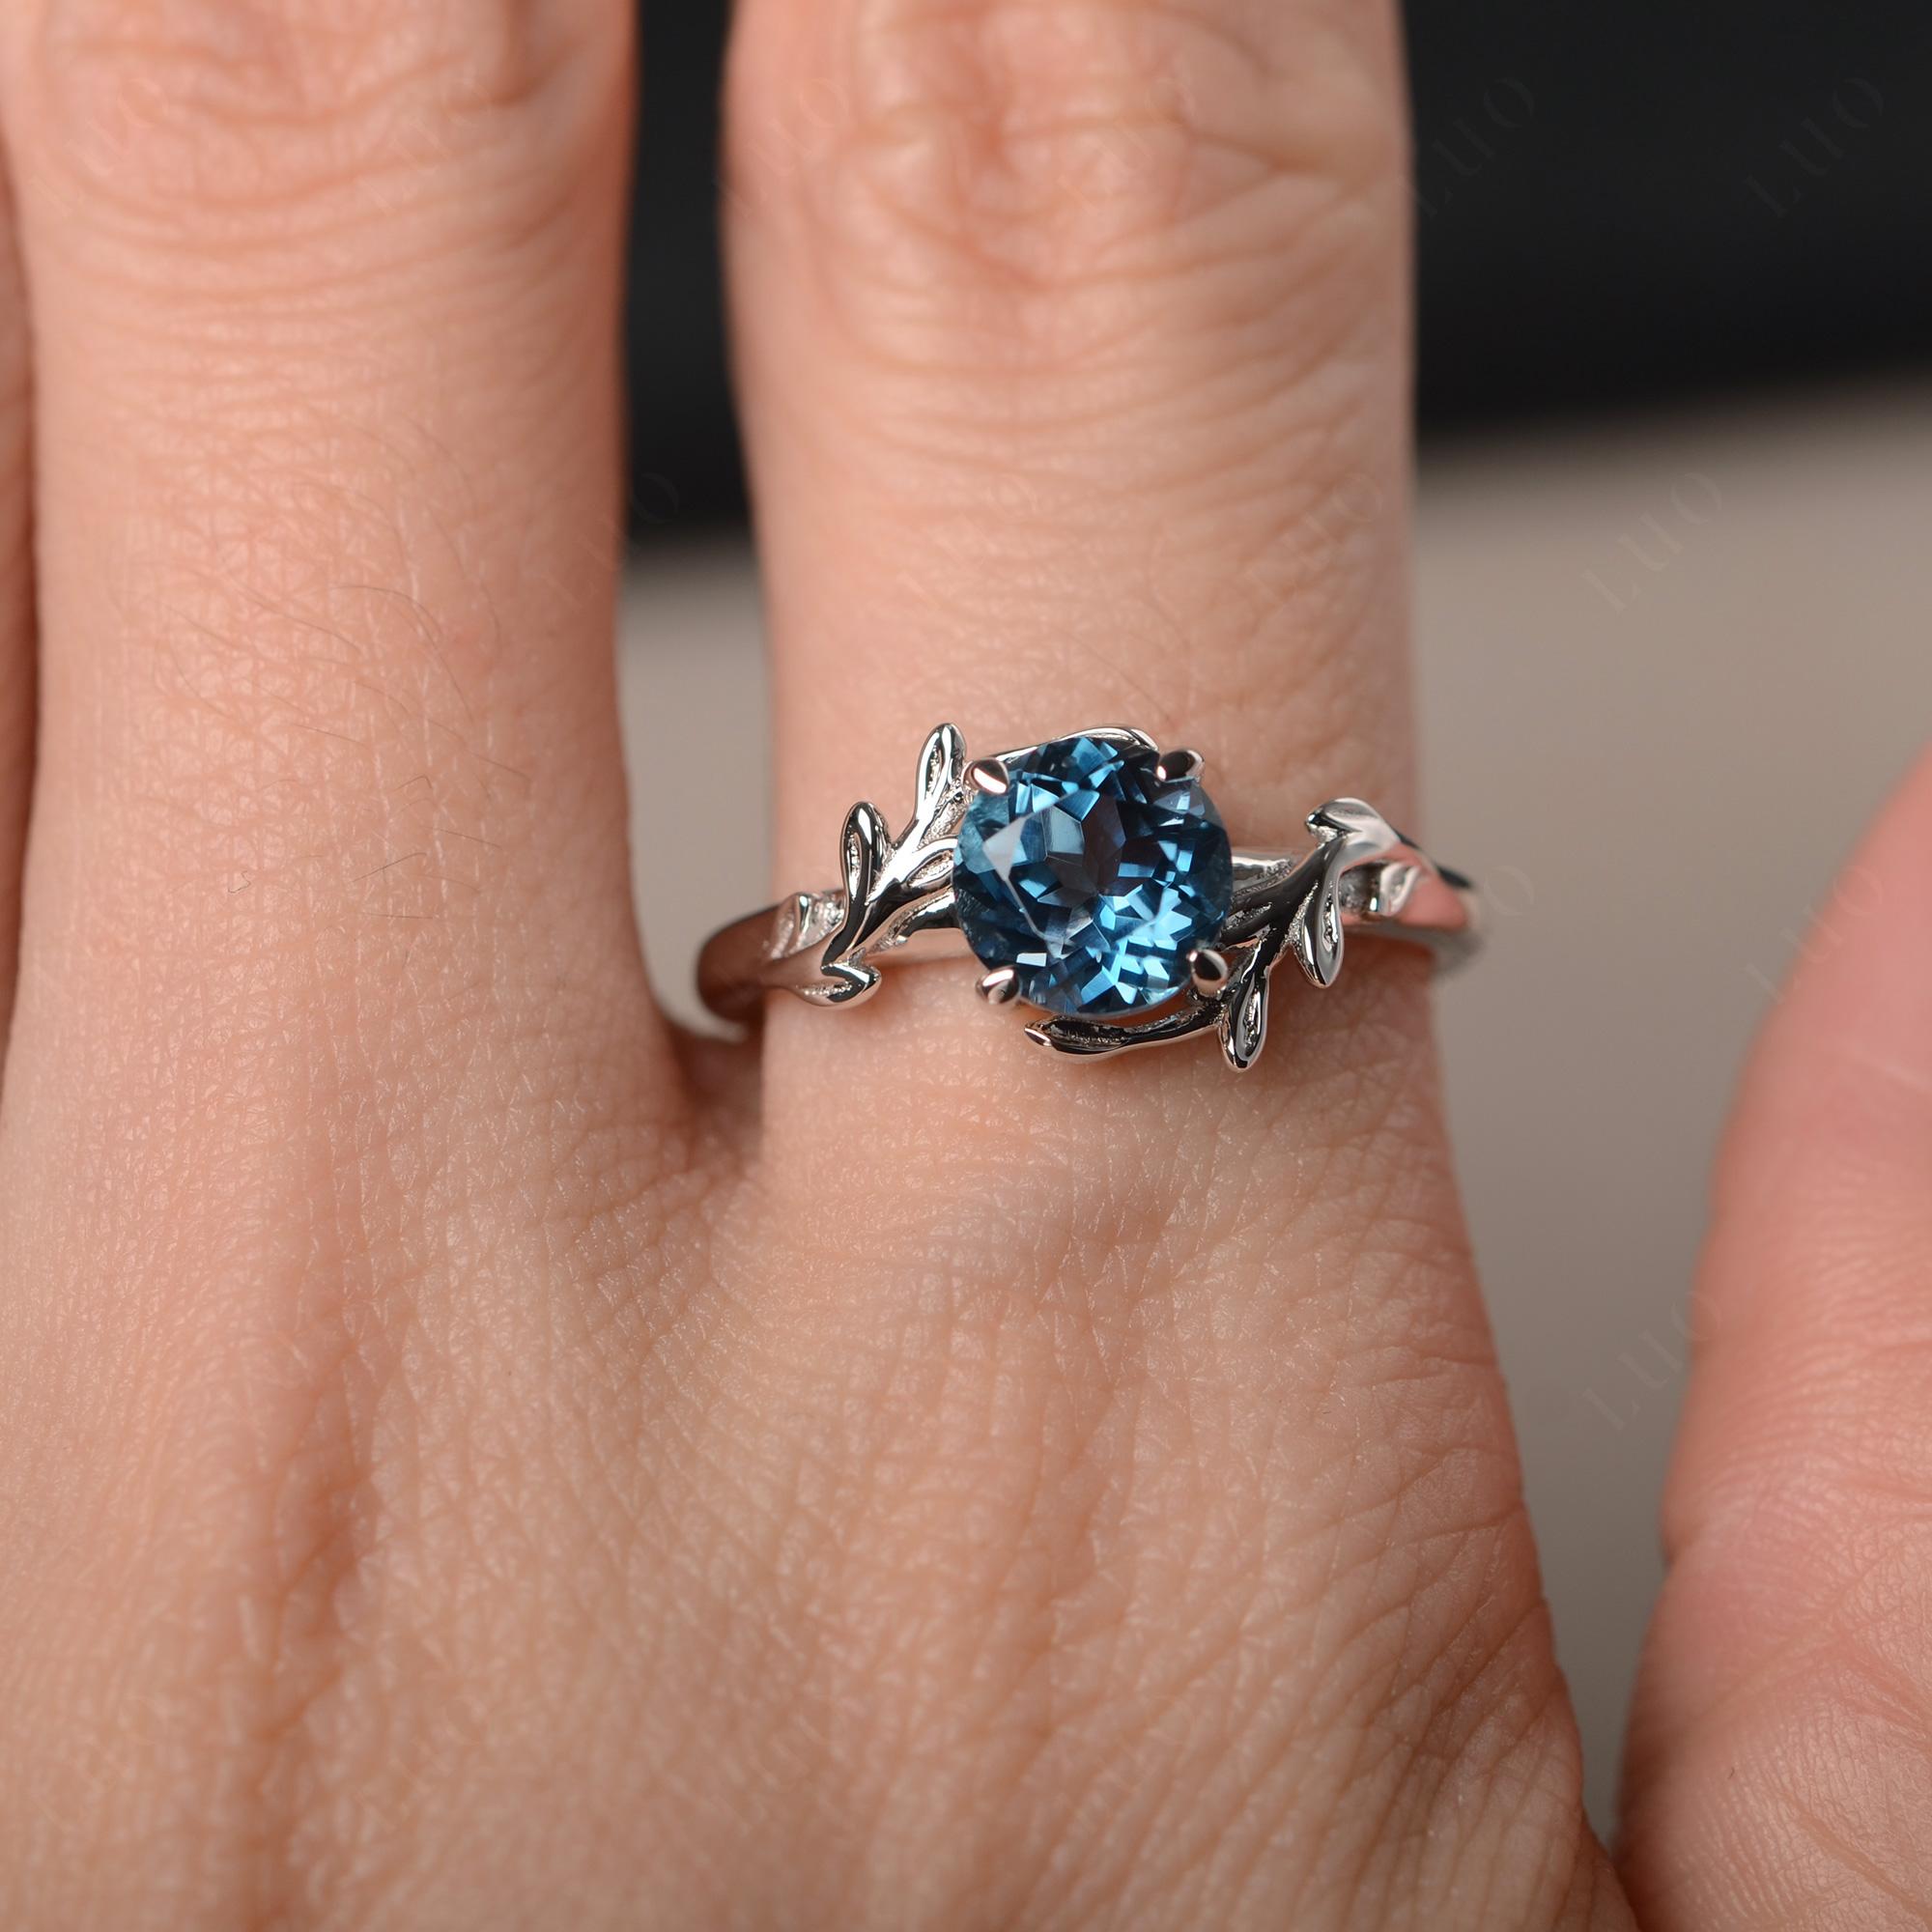 Vine London Blue Topaz Solitaire Engagement Ring - LUO Jewelry